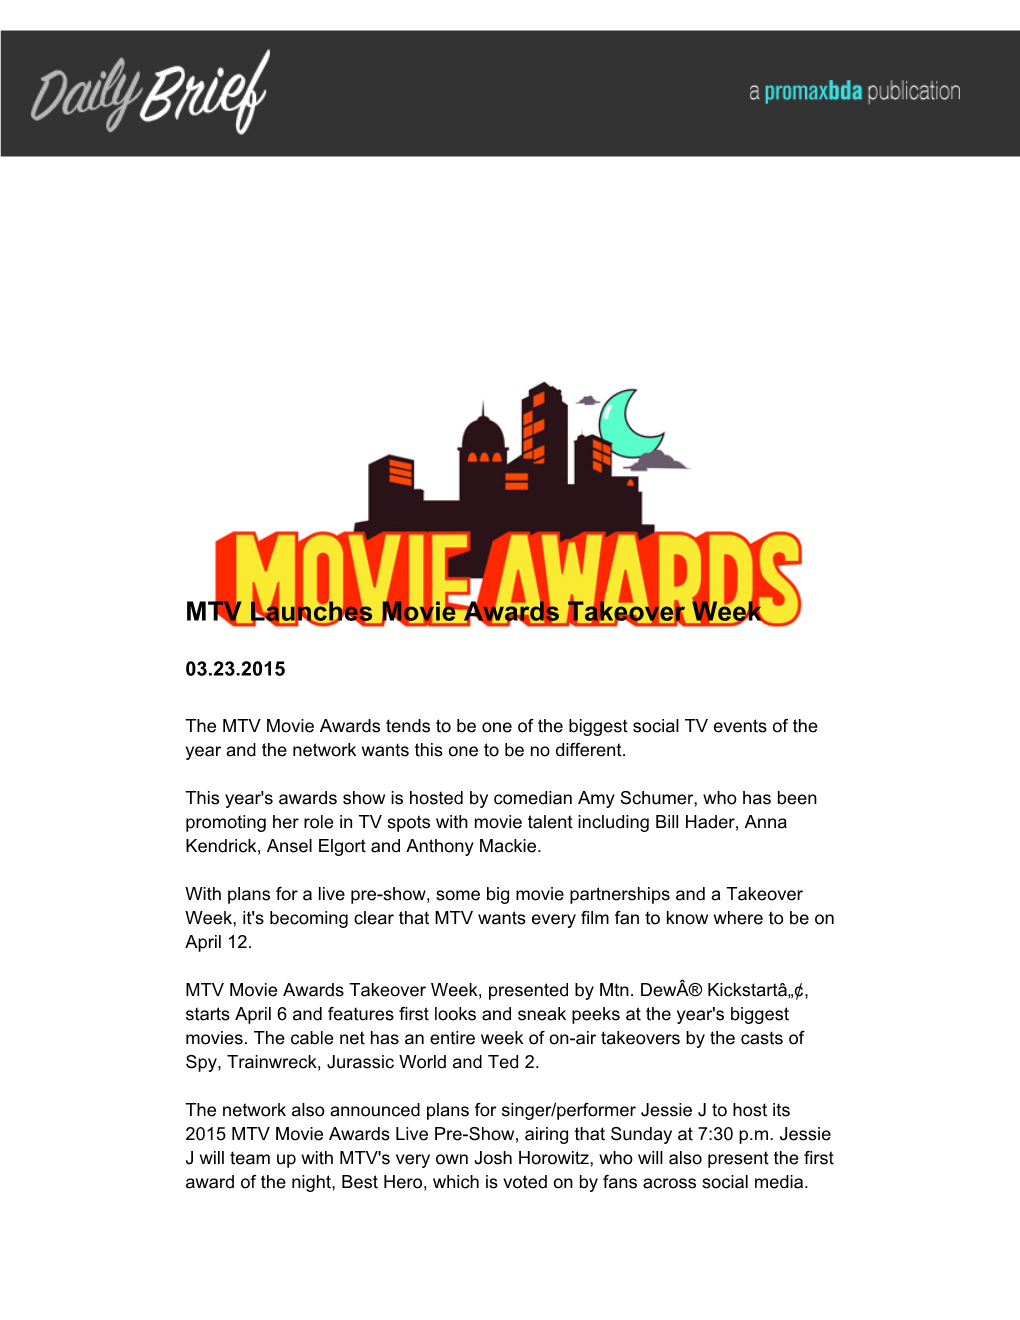 MTV Launches Movie Awards Takeover Week